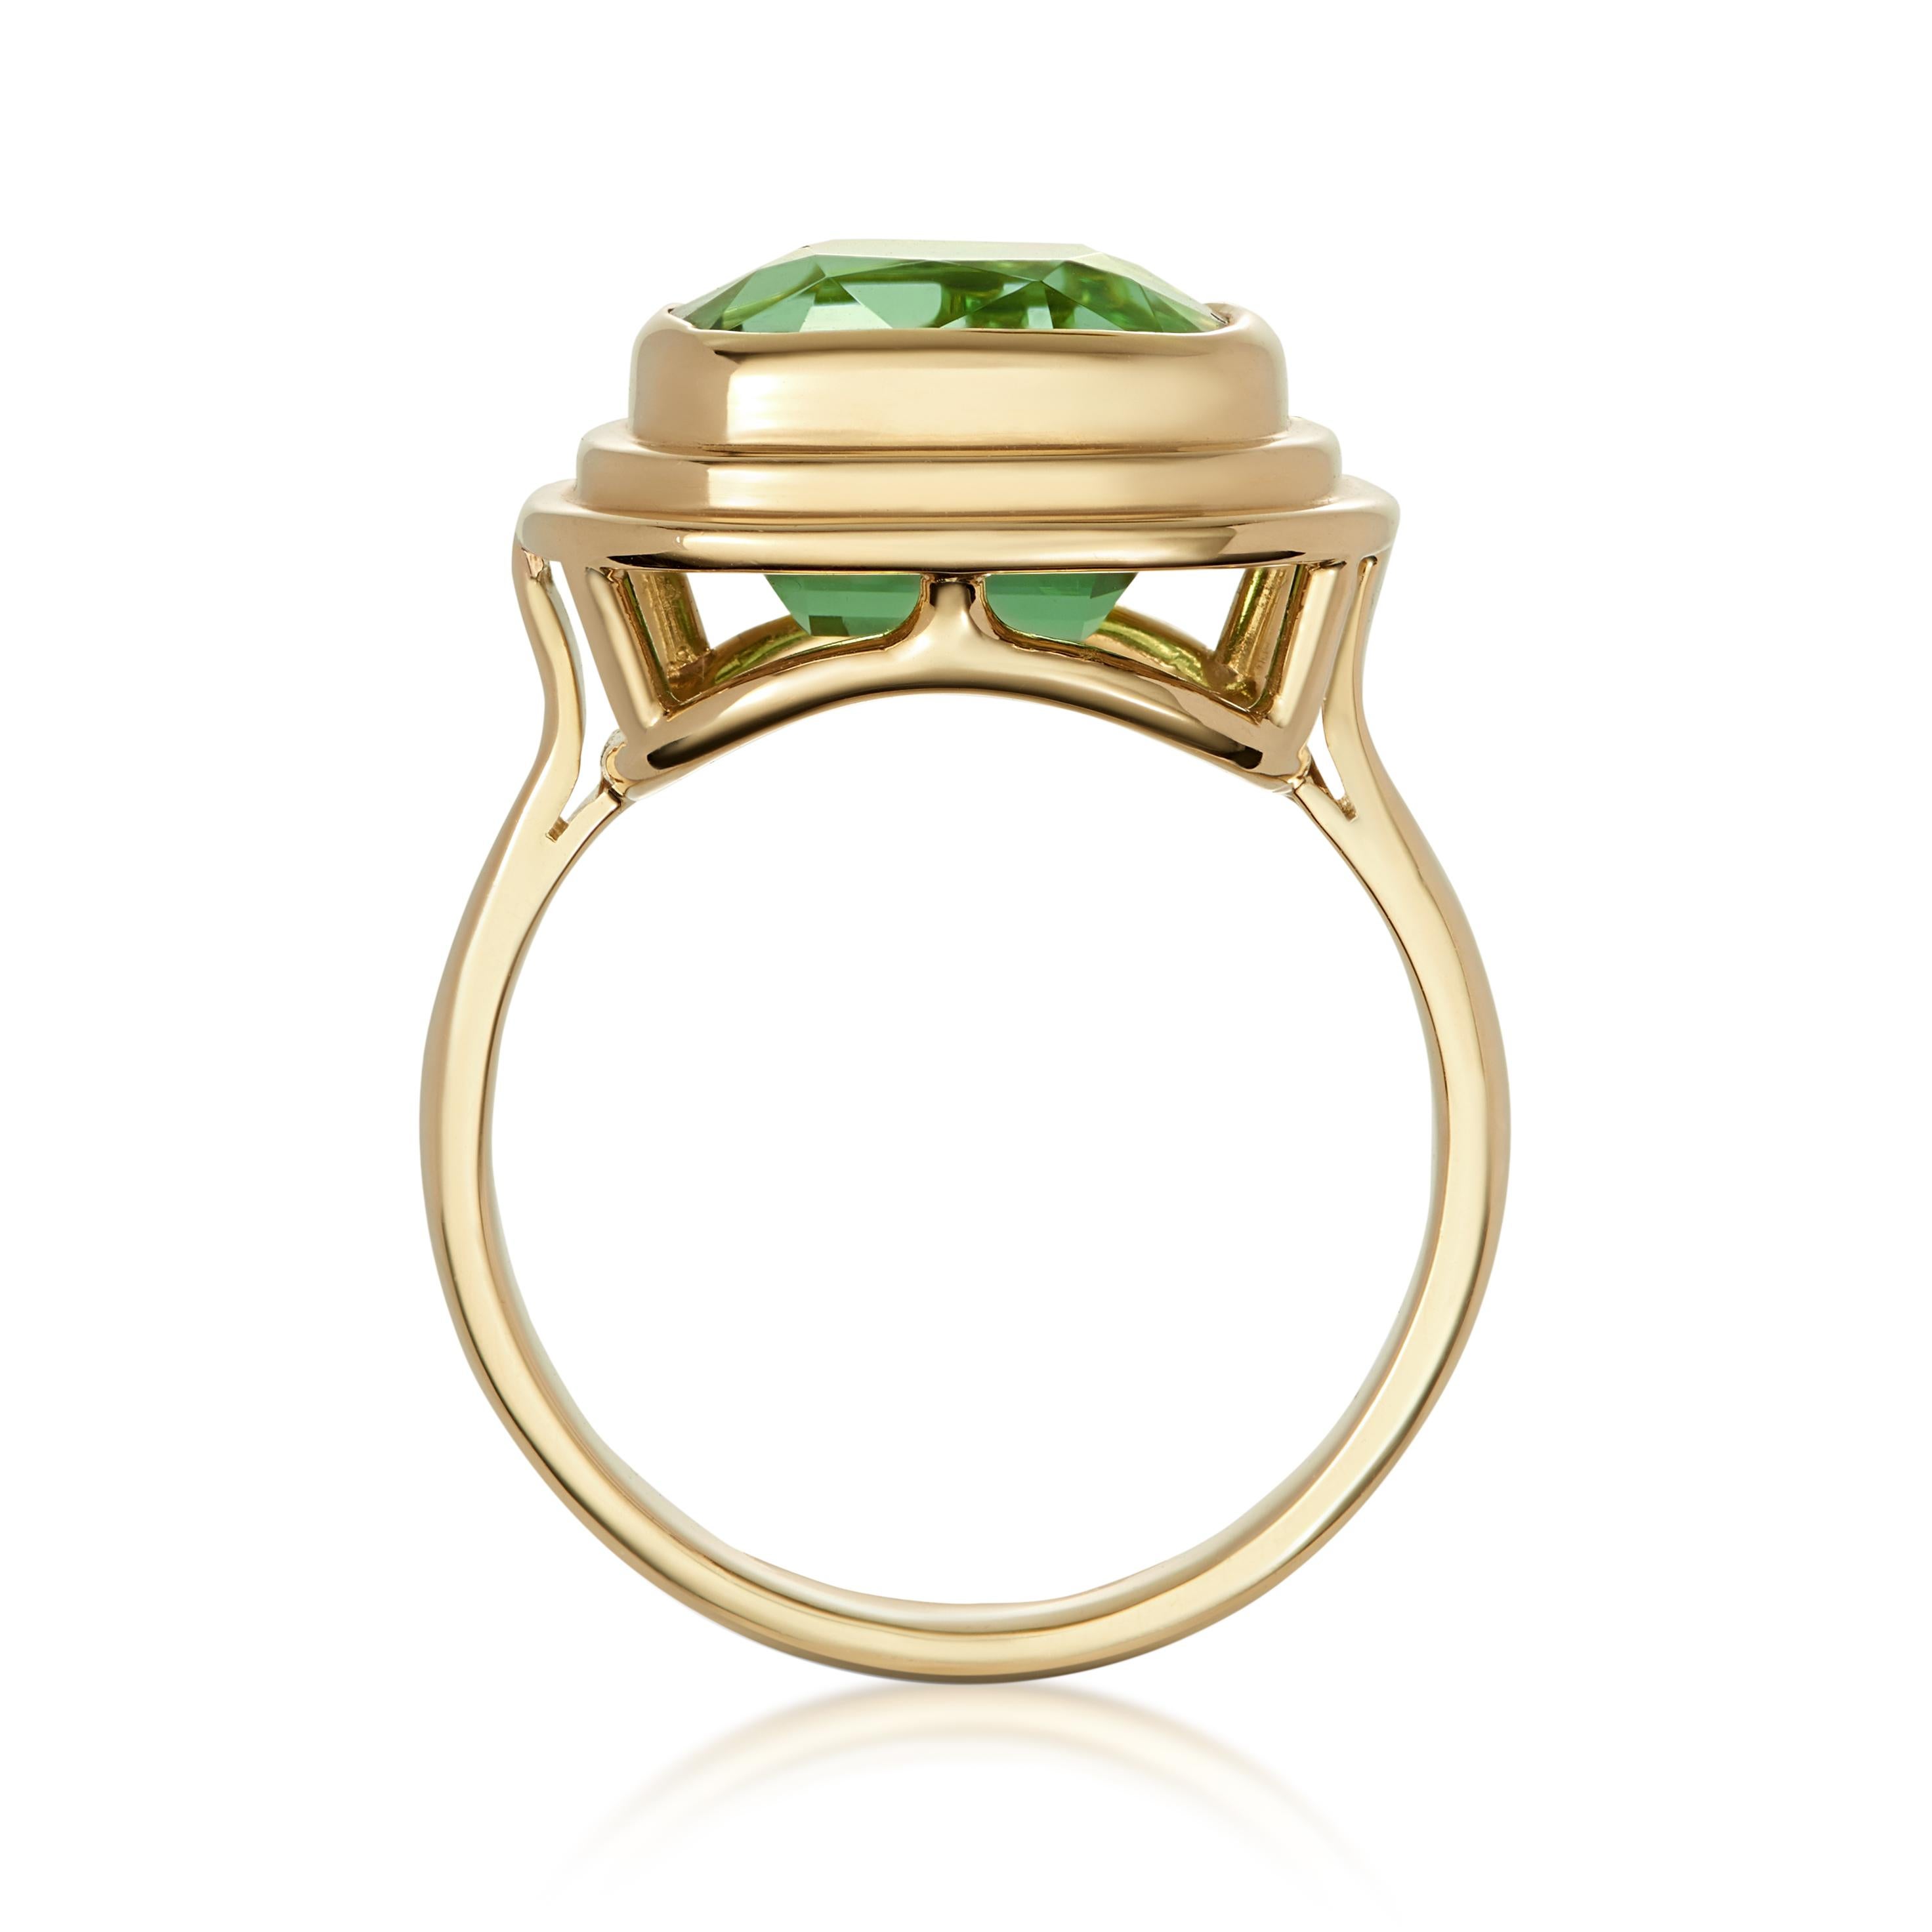 Striking vivid green 5.70 carat Tourmaline set into 18 karat yellow gold, Athena ring. 
Tourmaline comes in a variety of colours, green being the most popular and this gorgeous stone is a brilliant and bright Tourmaline, such an eye catching colour.